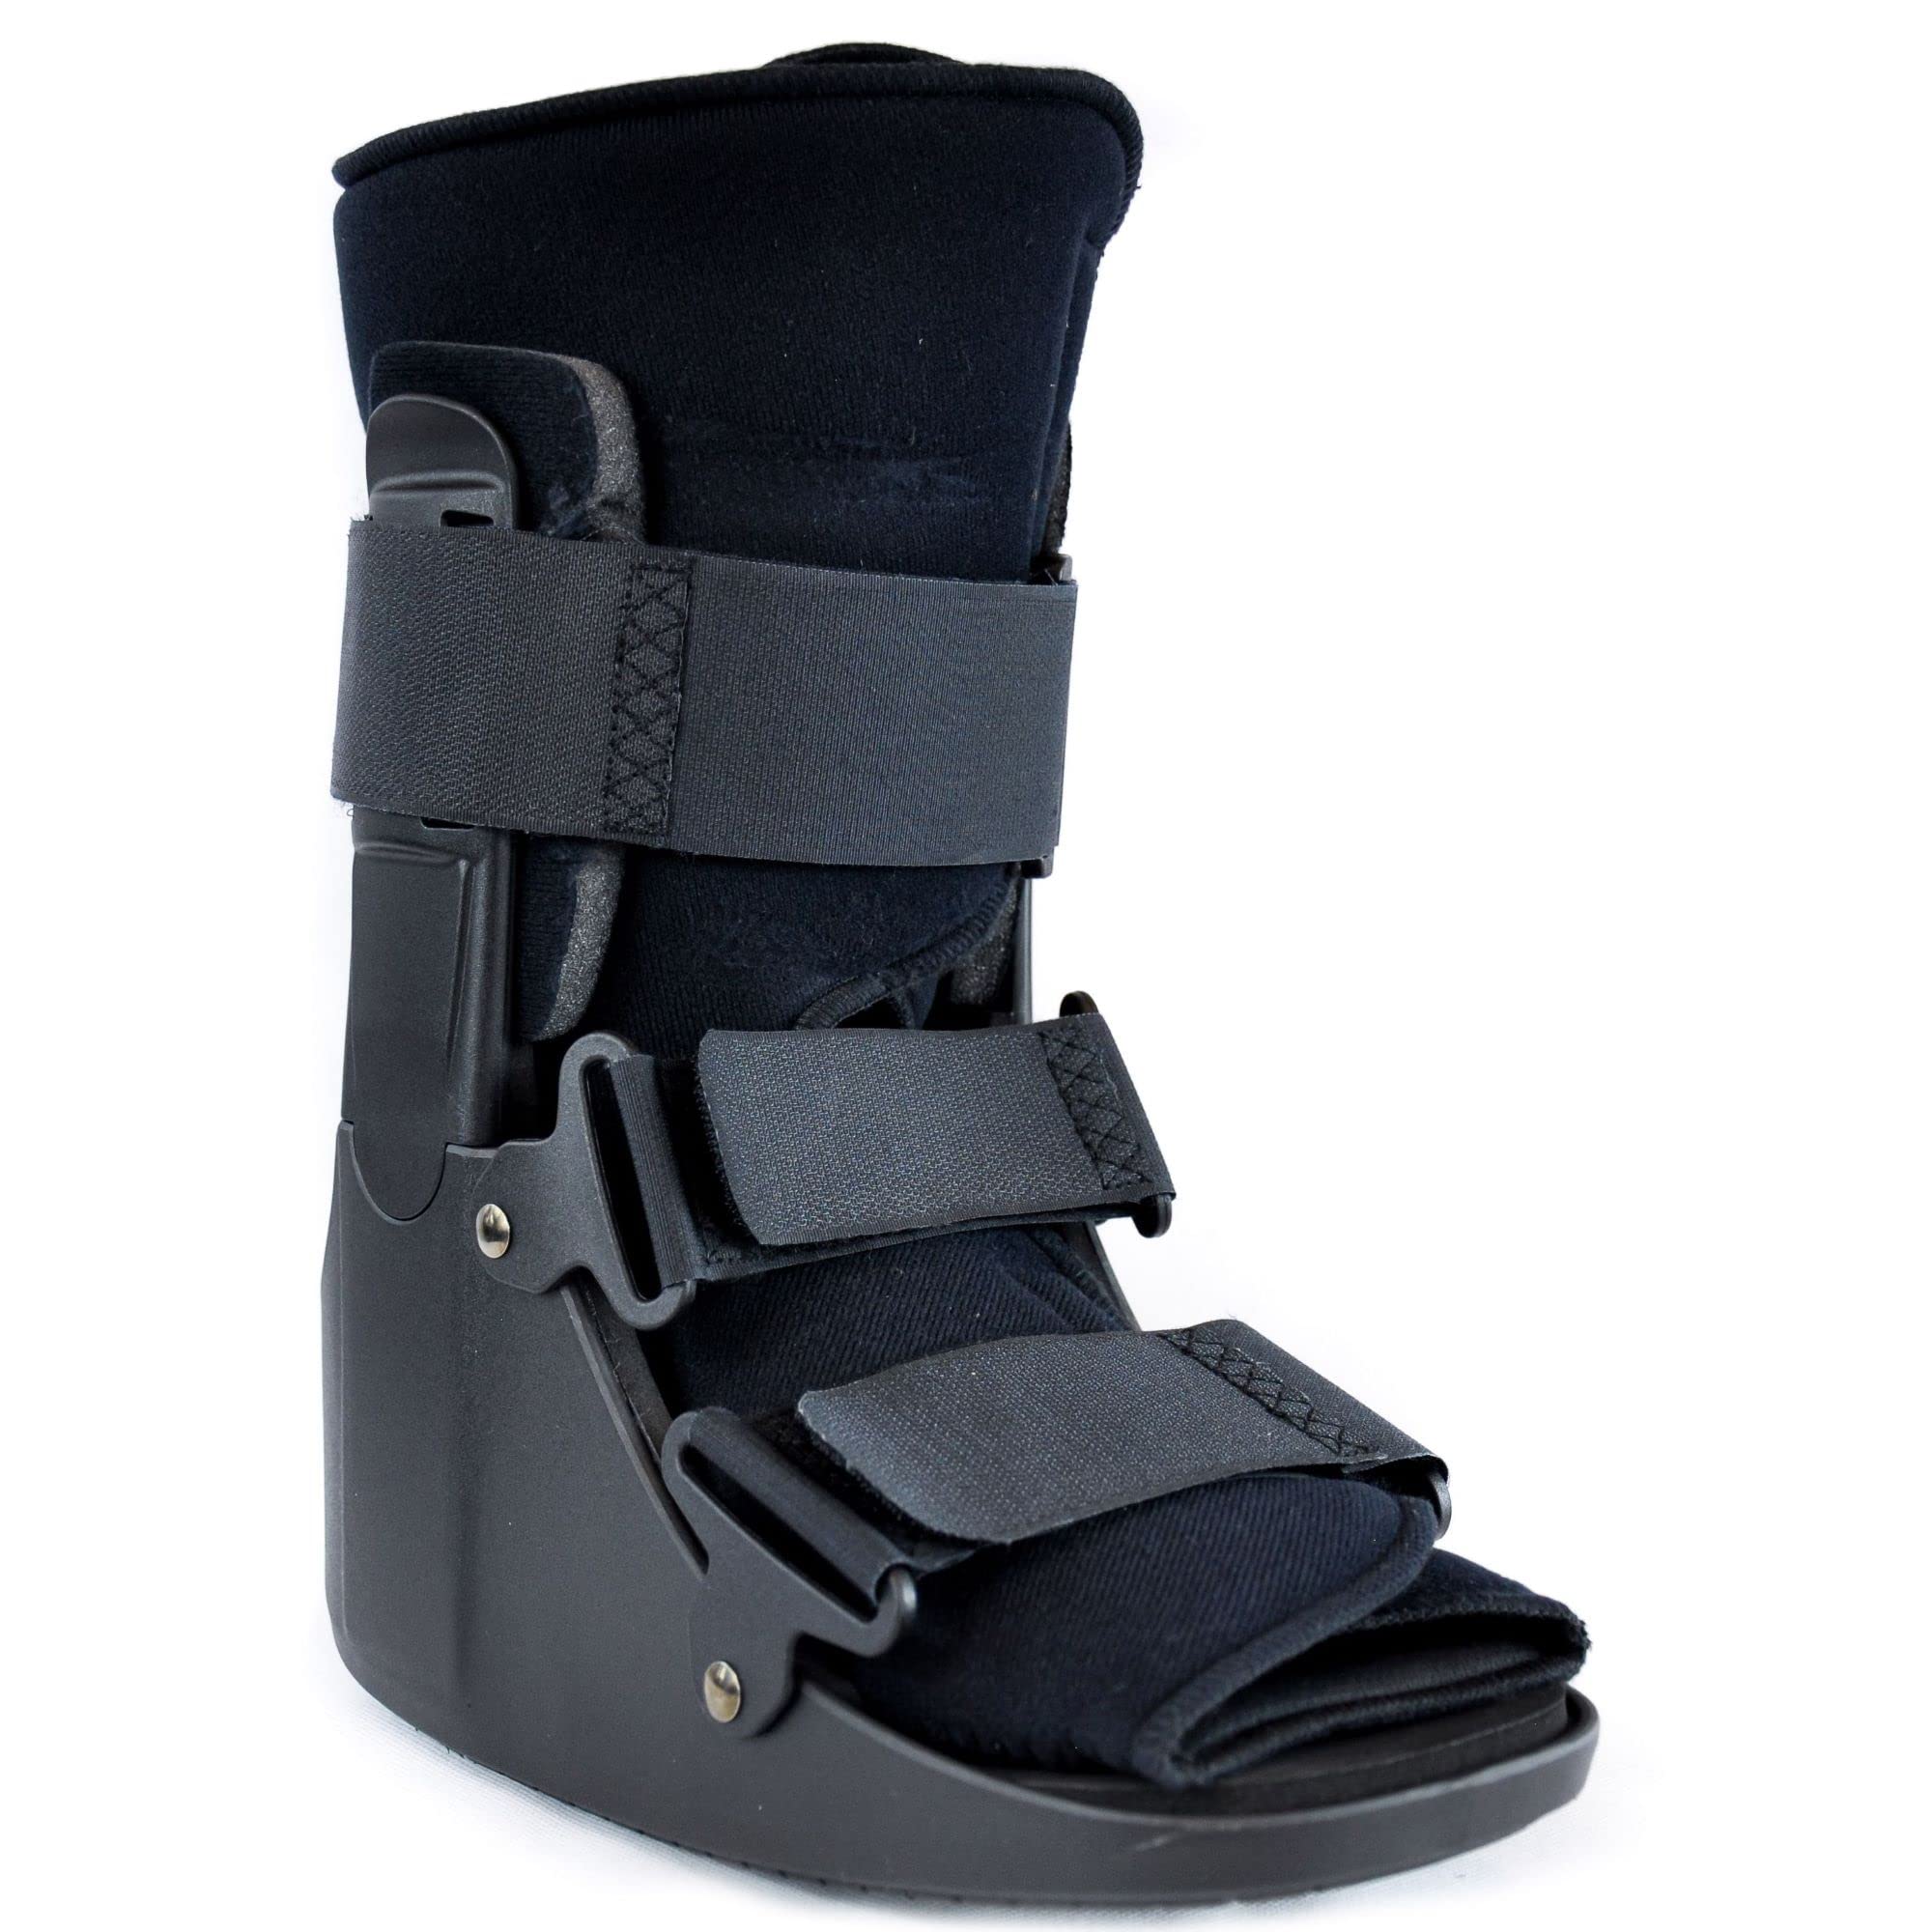 Wide CAM Walker Fracture Orthopedic Boot Short Extended Width 2E- Complete Medical Recovery, Protection, Healing and Boot- Toe Foot or Ankle Injuri...